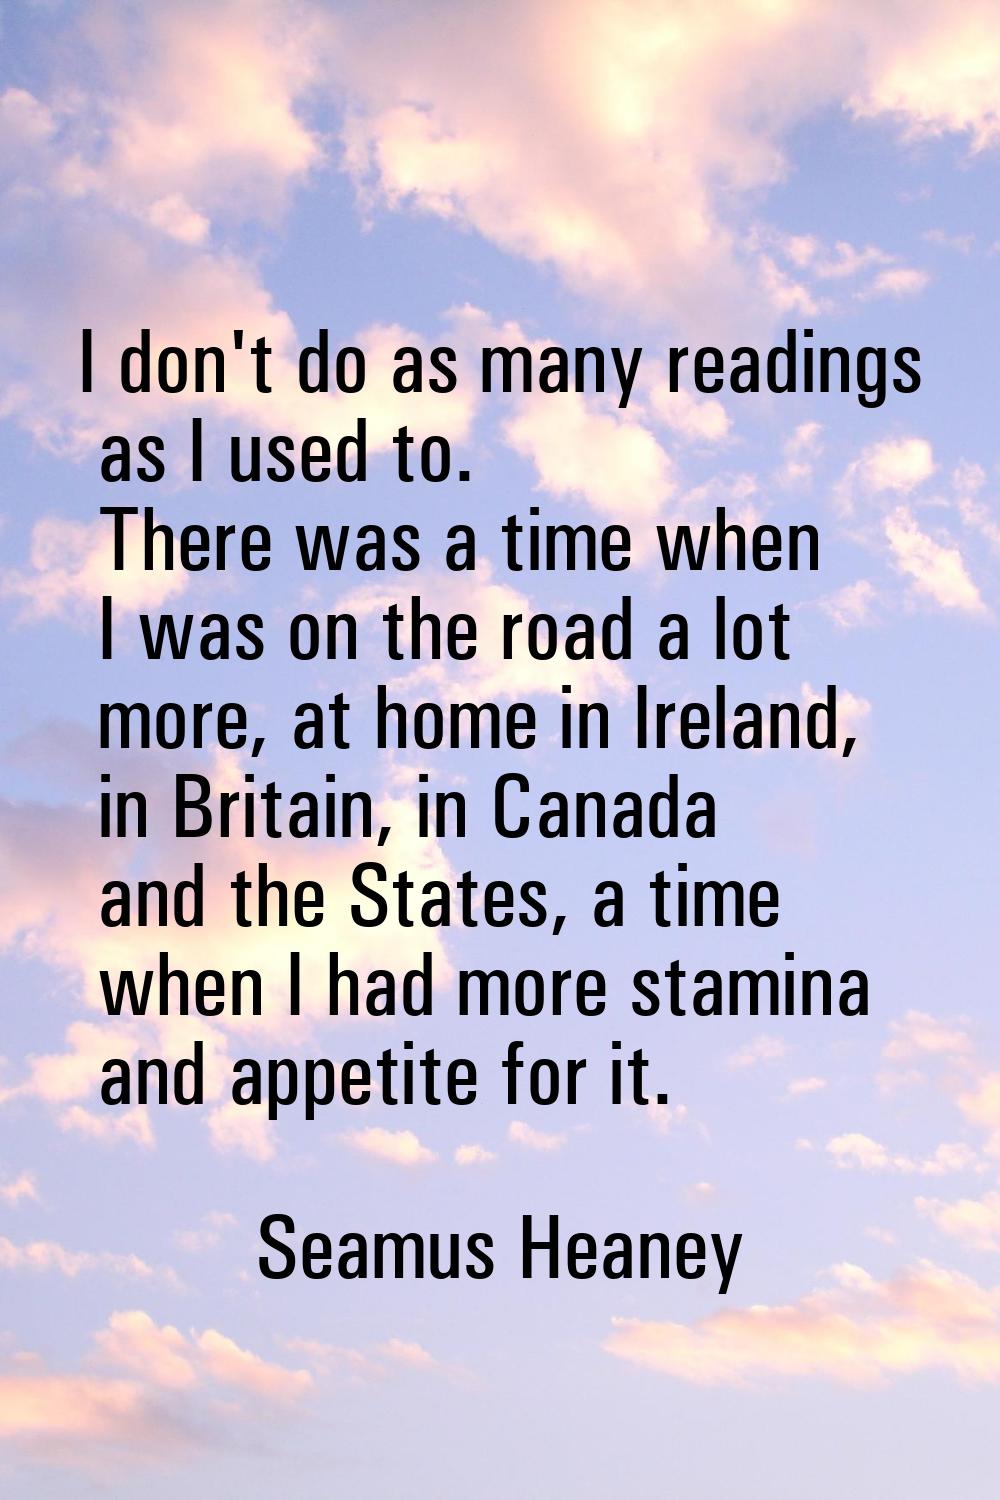 I don't do as many readings as I used to. There was a time when I was on the road a lot more, at ho